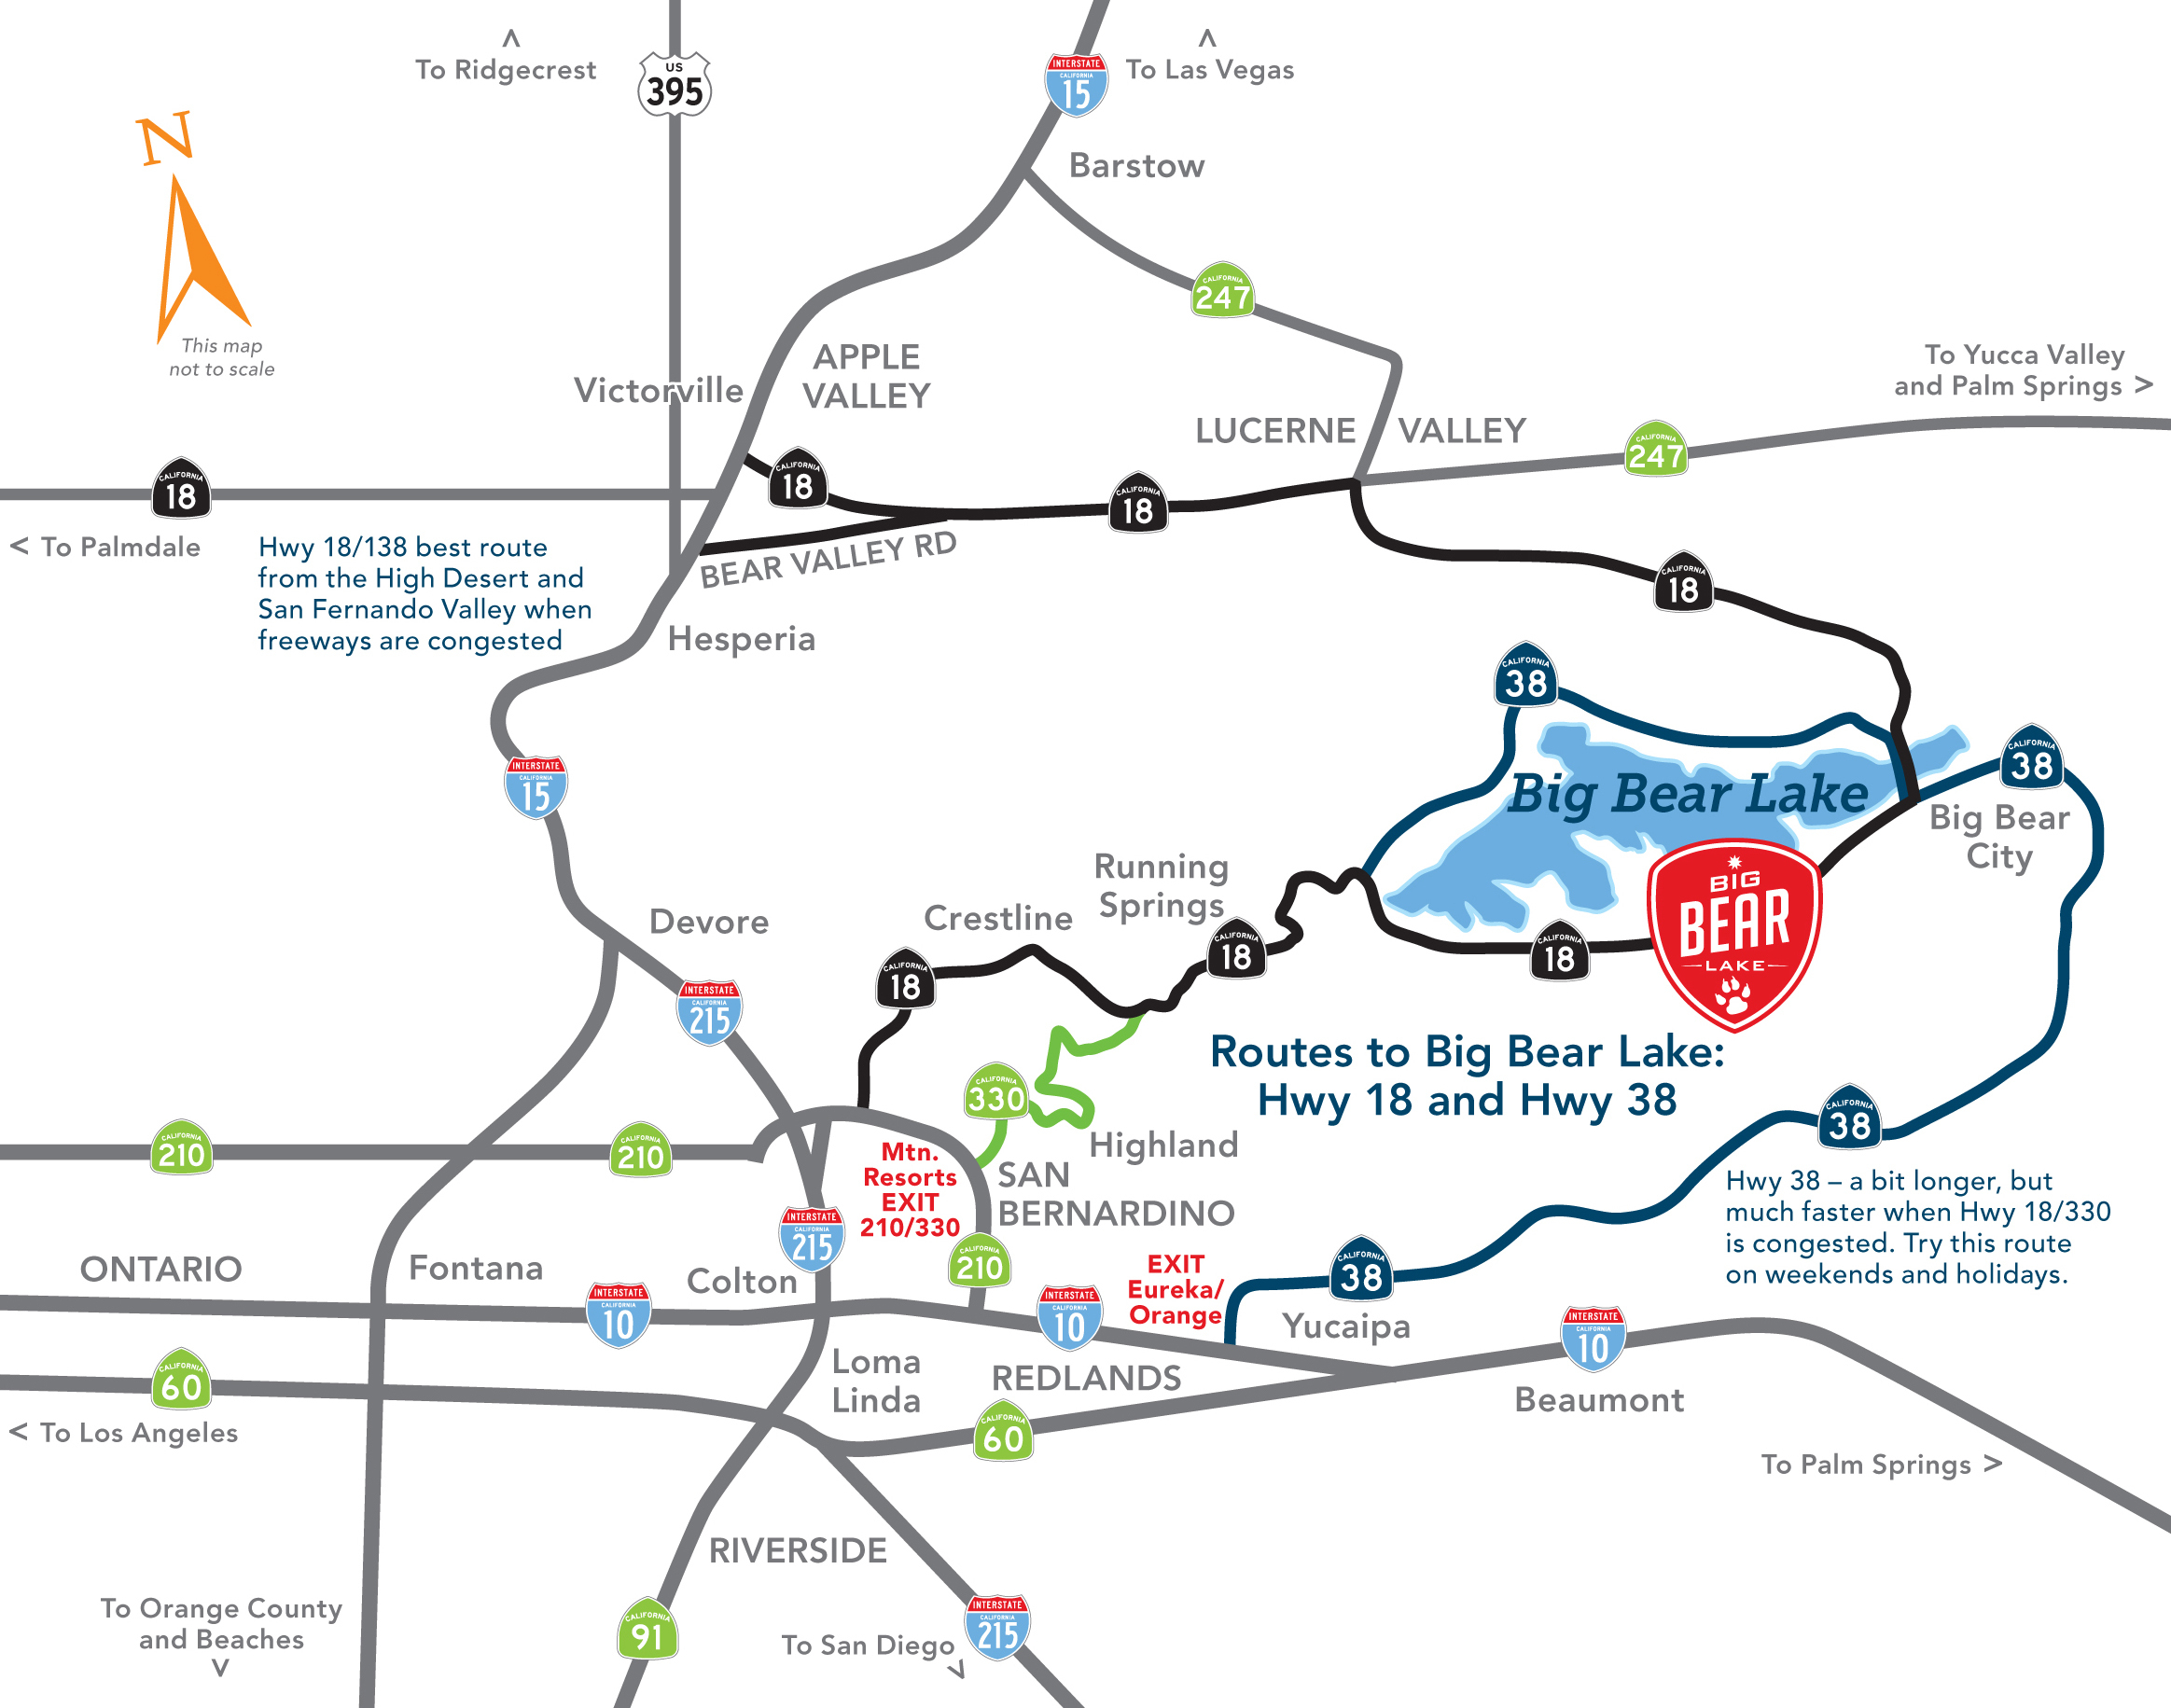 Driving Directions Into Big Bear Lake (4 Unique Routes) - Printable Driving Directions Map